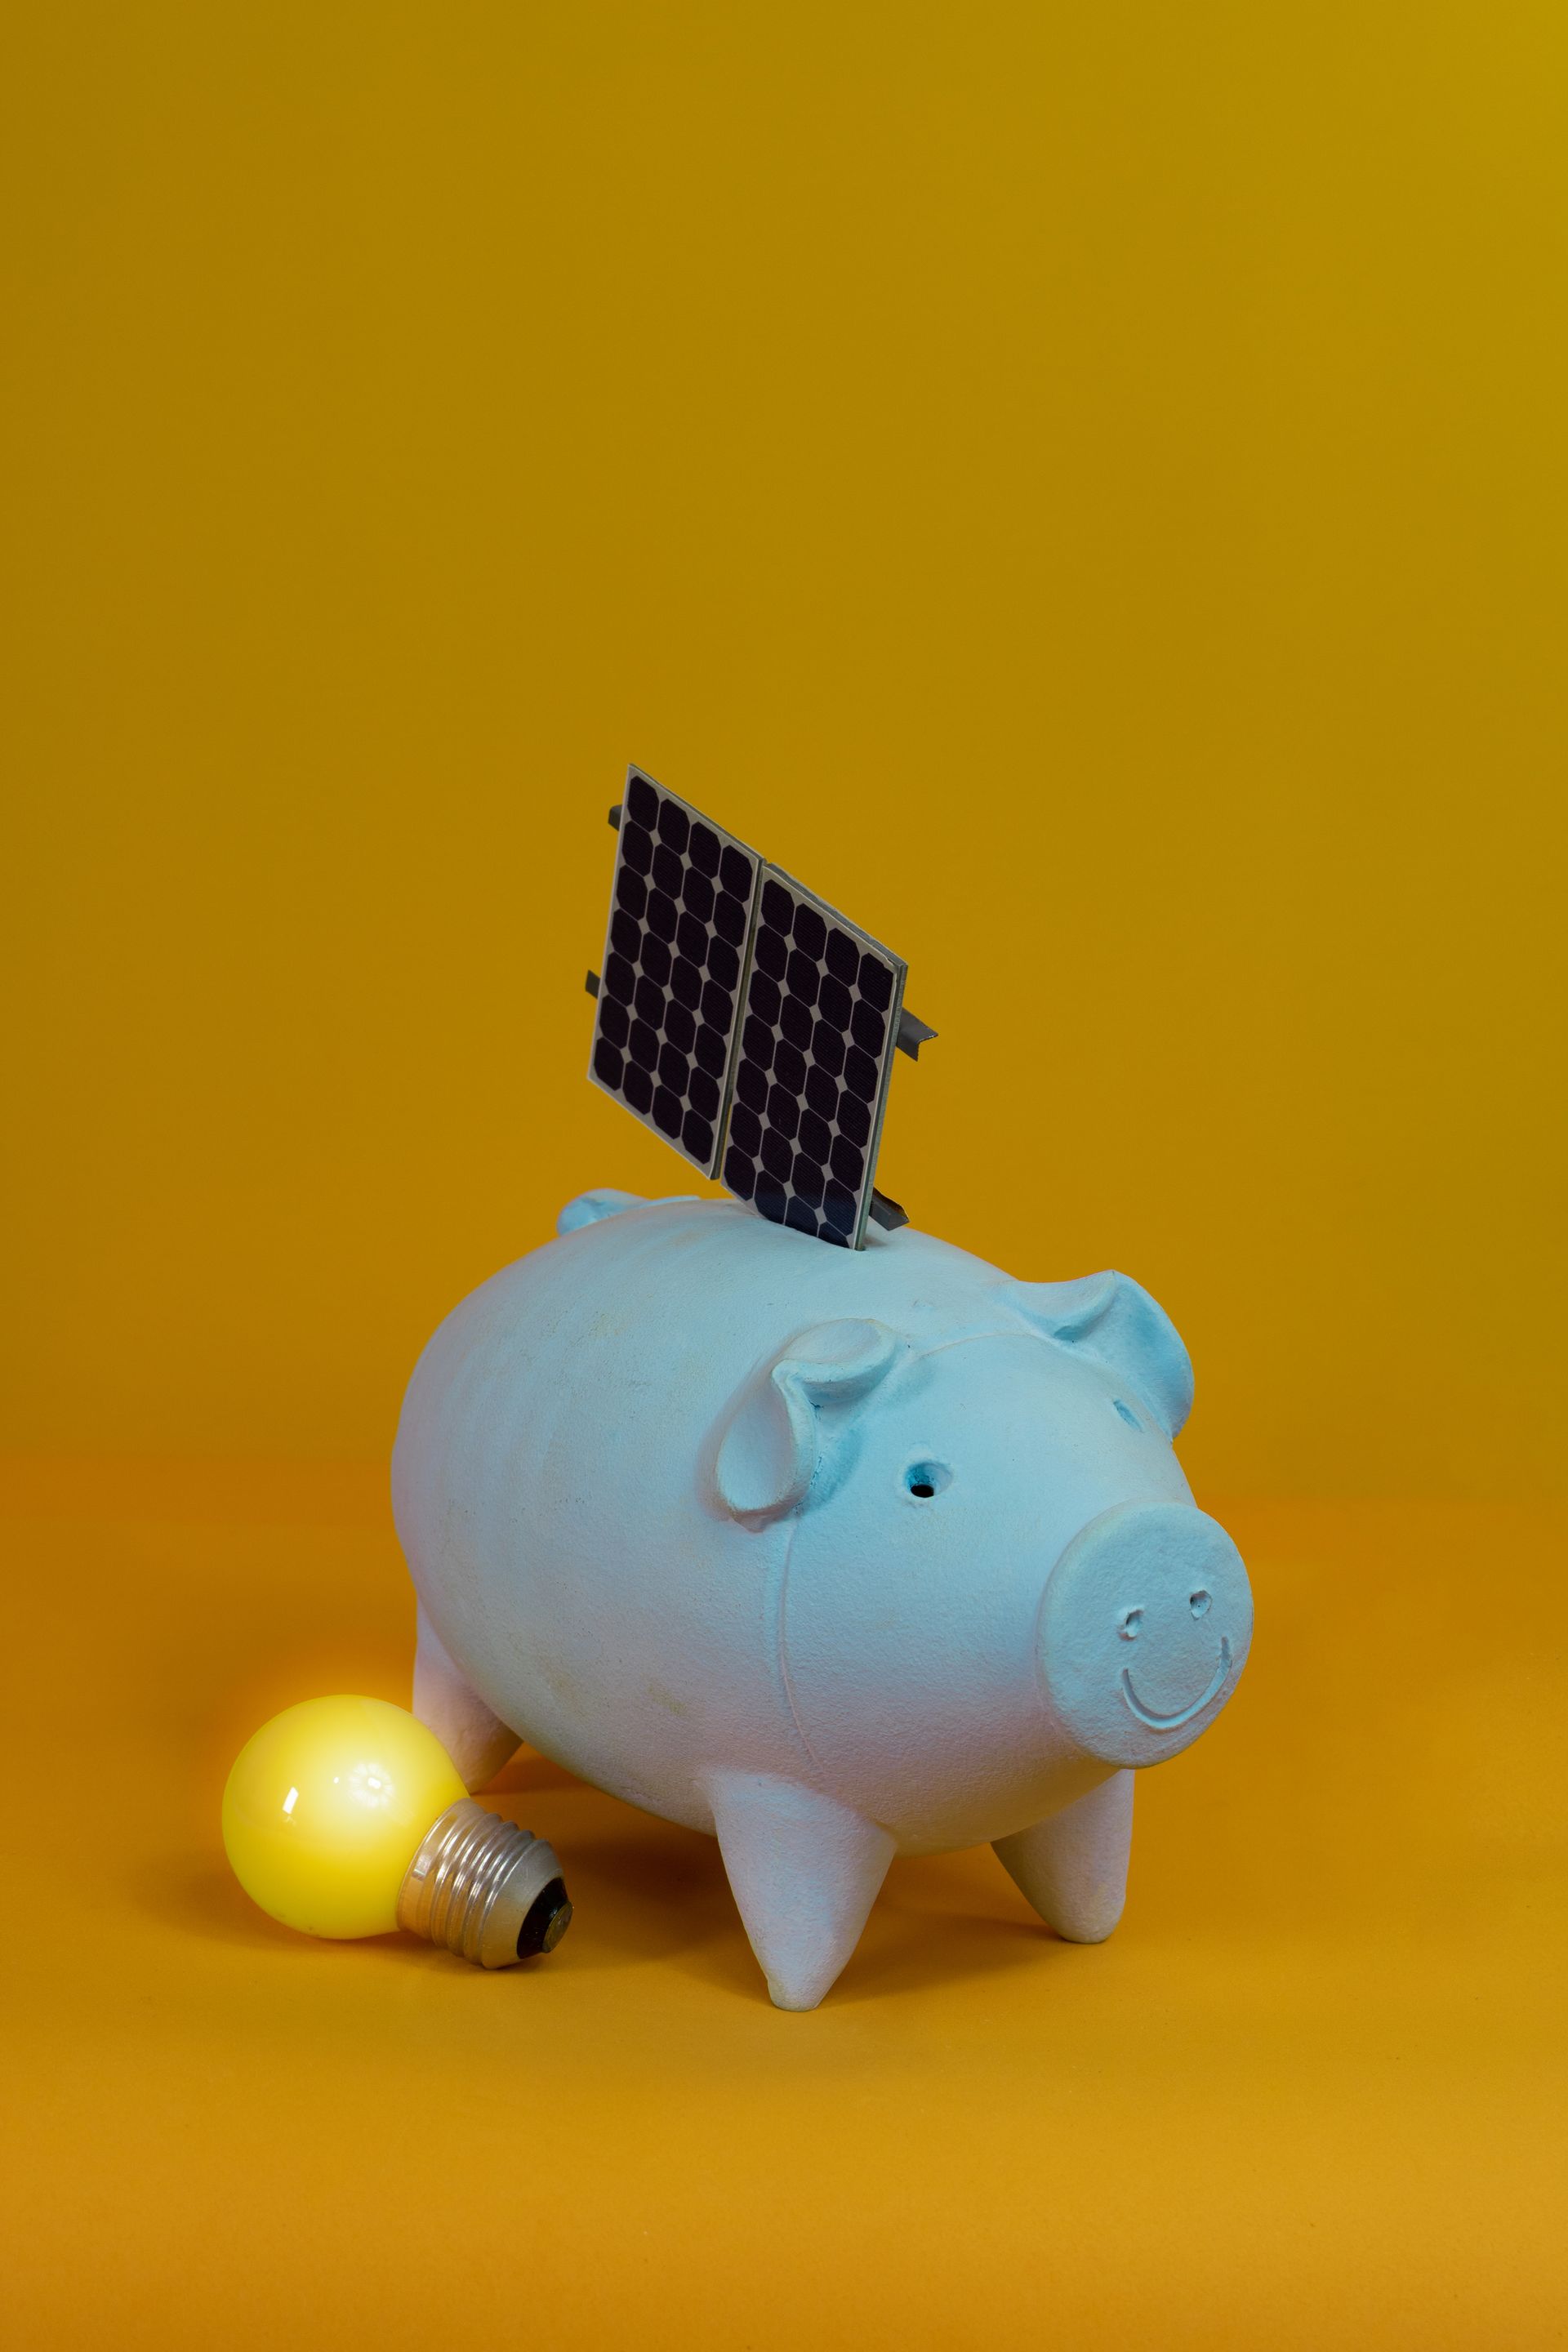 piggy bank depicting cost savings through the use of alternative power systems